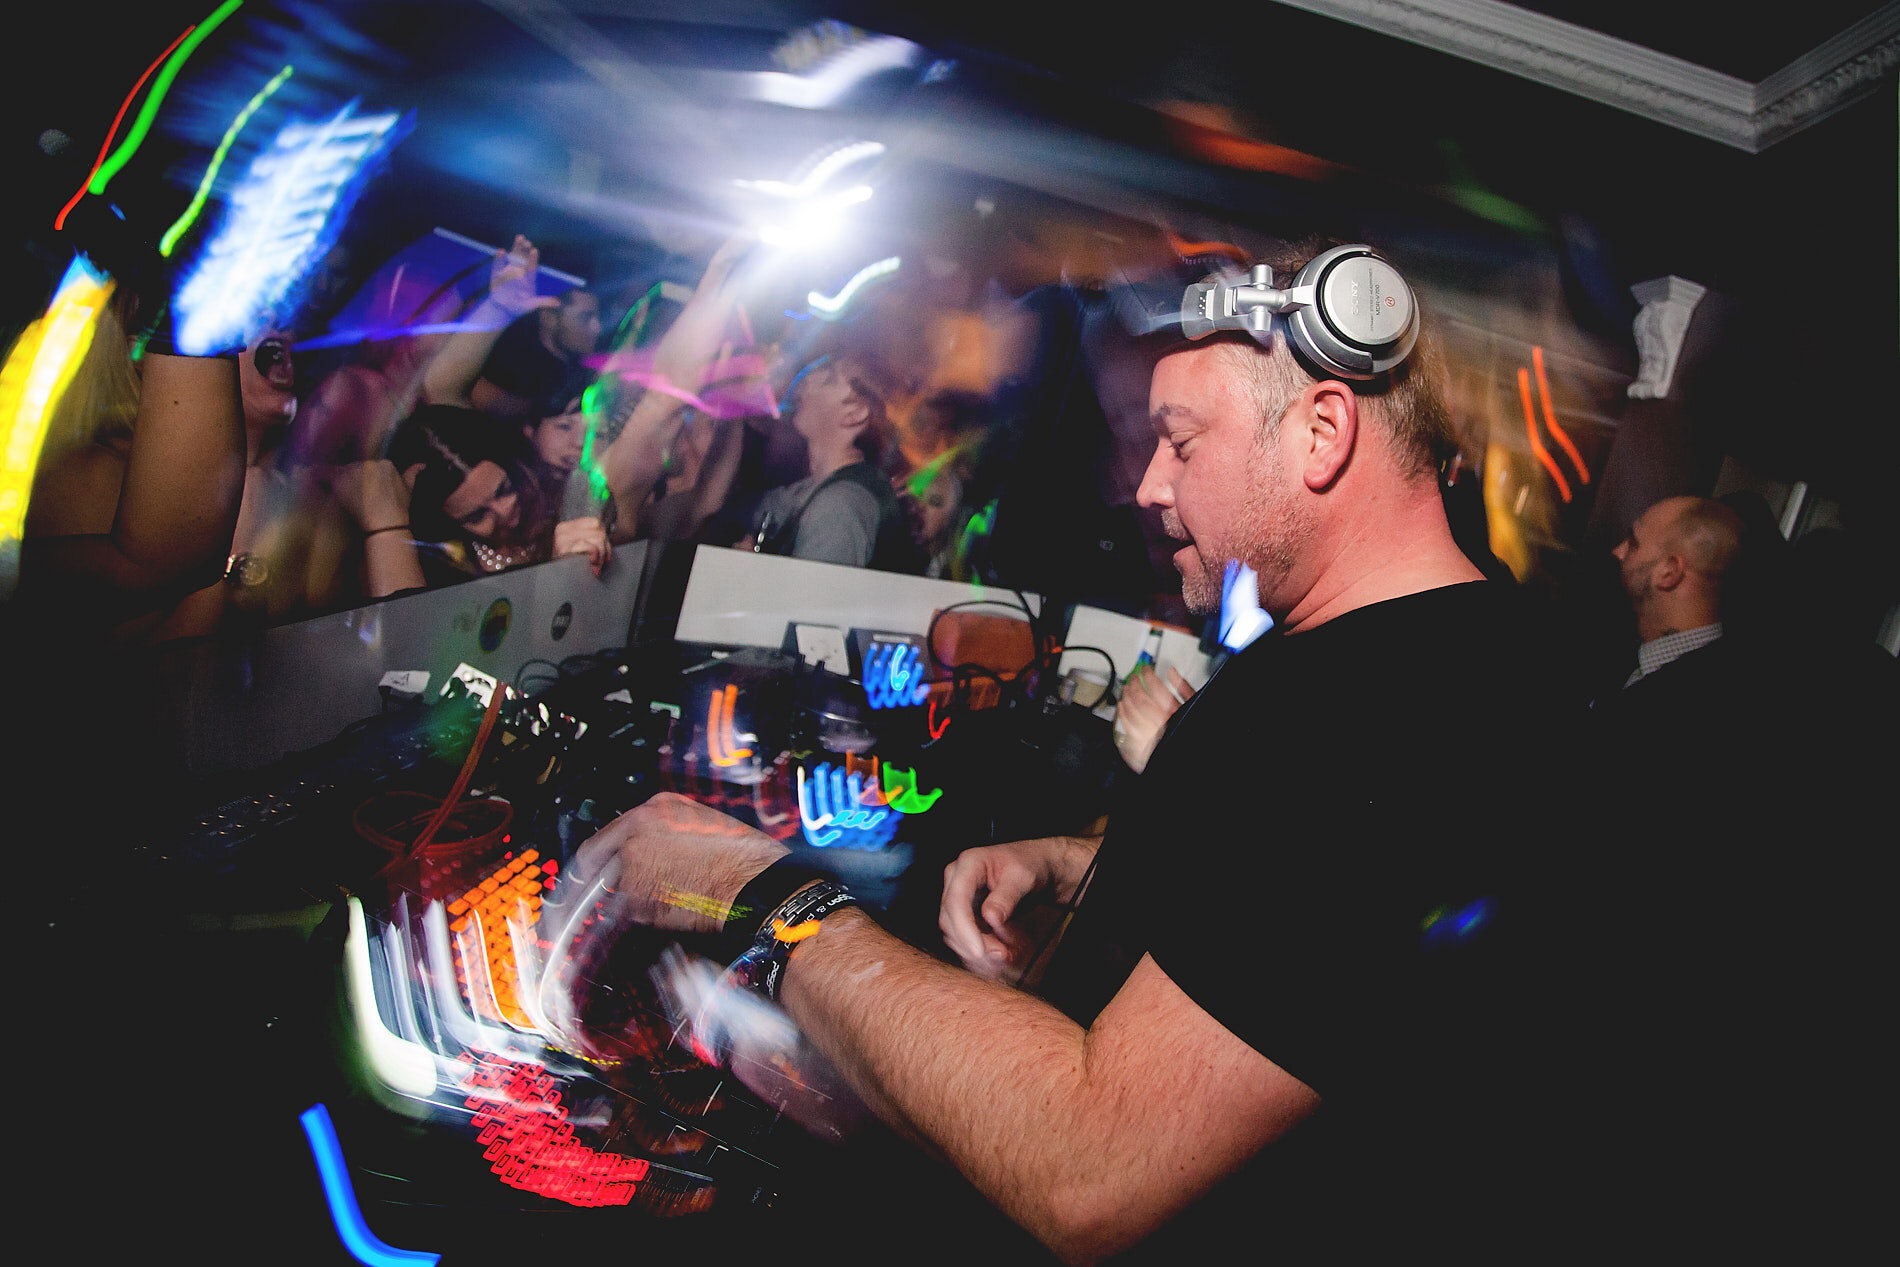 DJ performing at decks with swirling lights